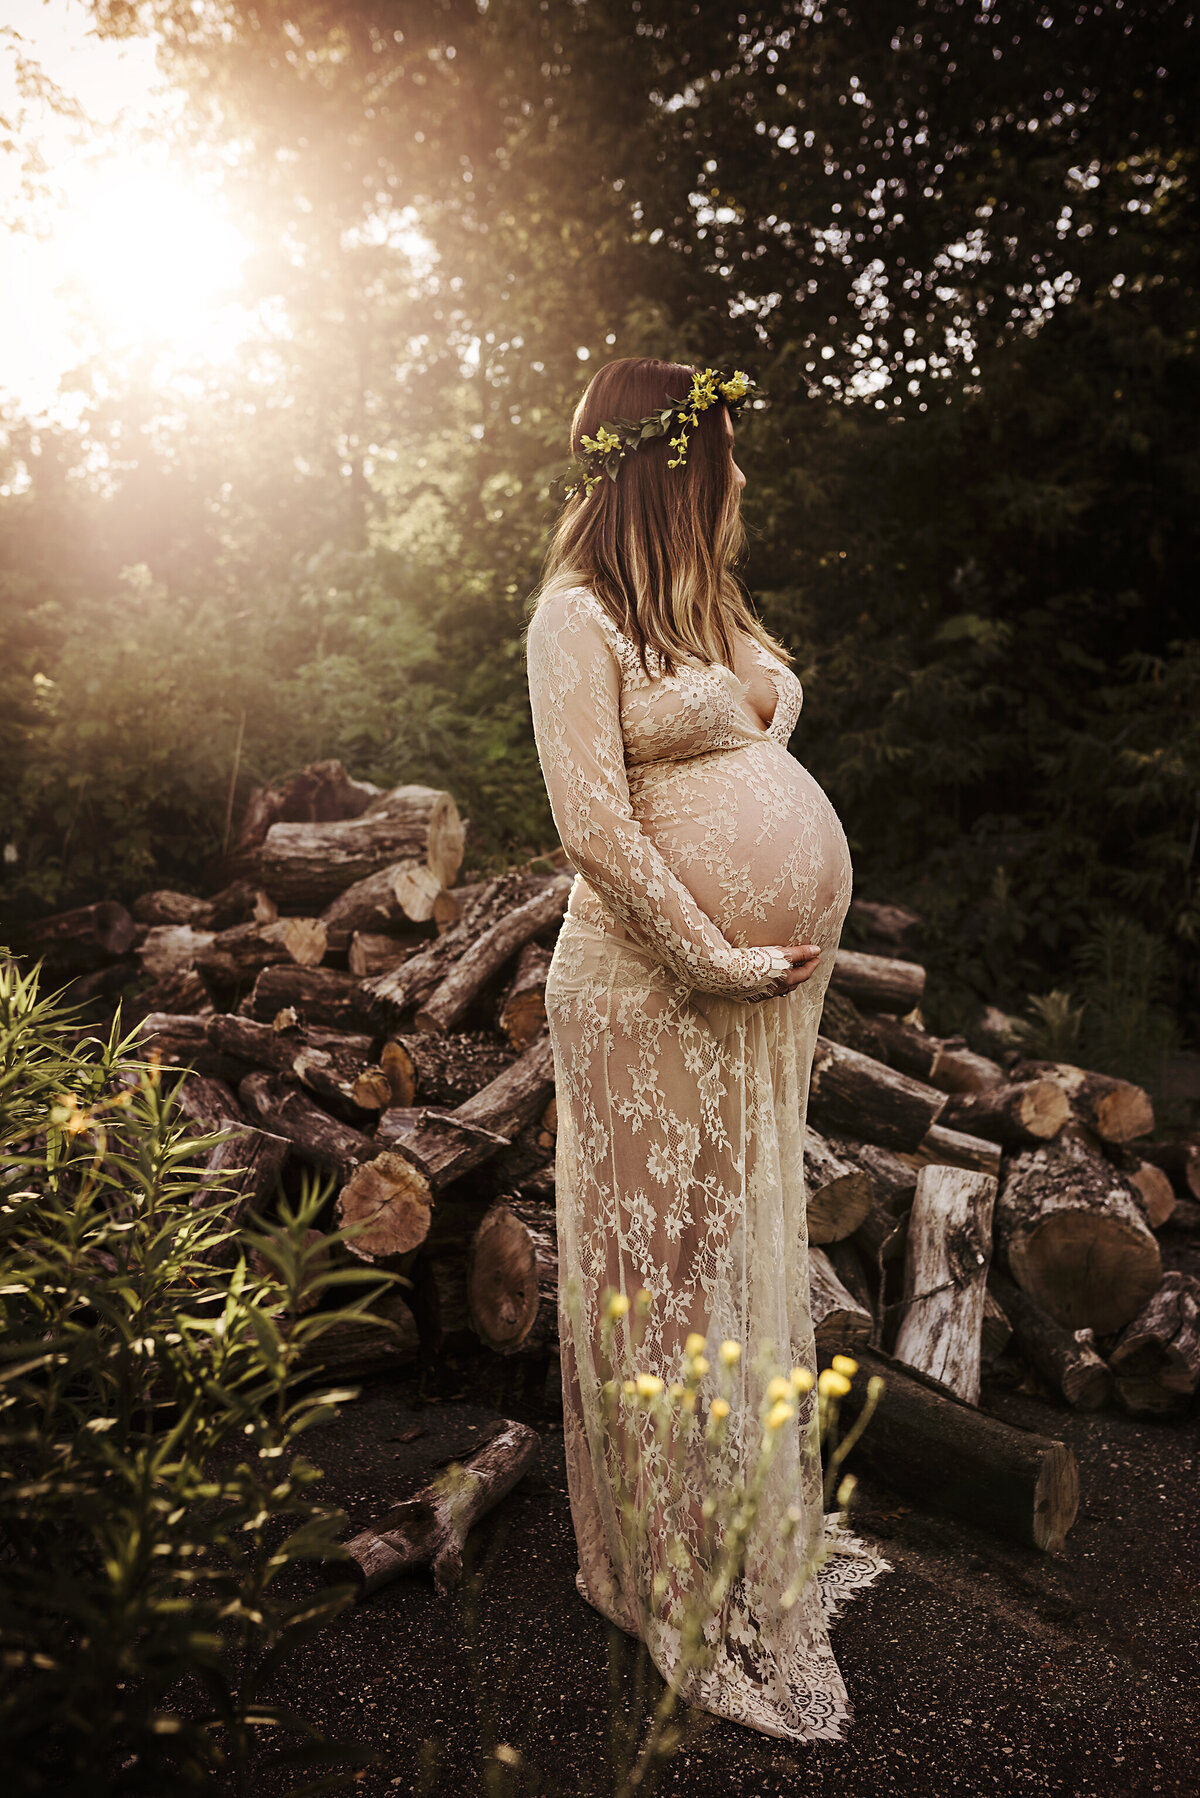 Turn your maternity journey into a work of art with Shannon Kathleen Photography. Experience the magic of expecting elegance. Reserve your maternity portrait session now!